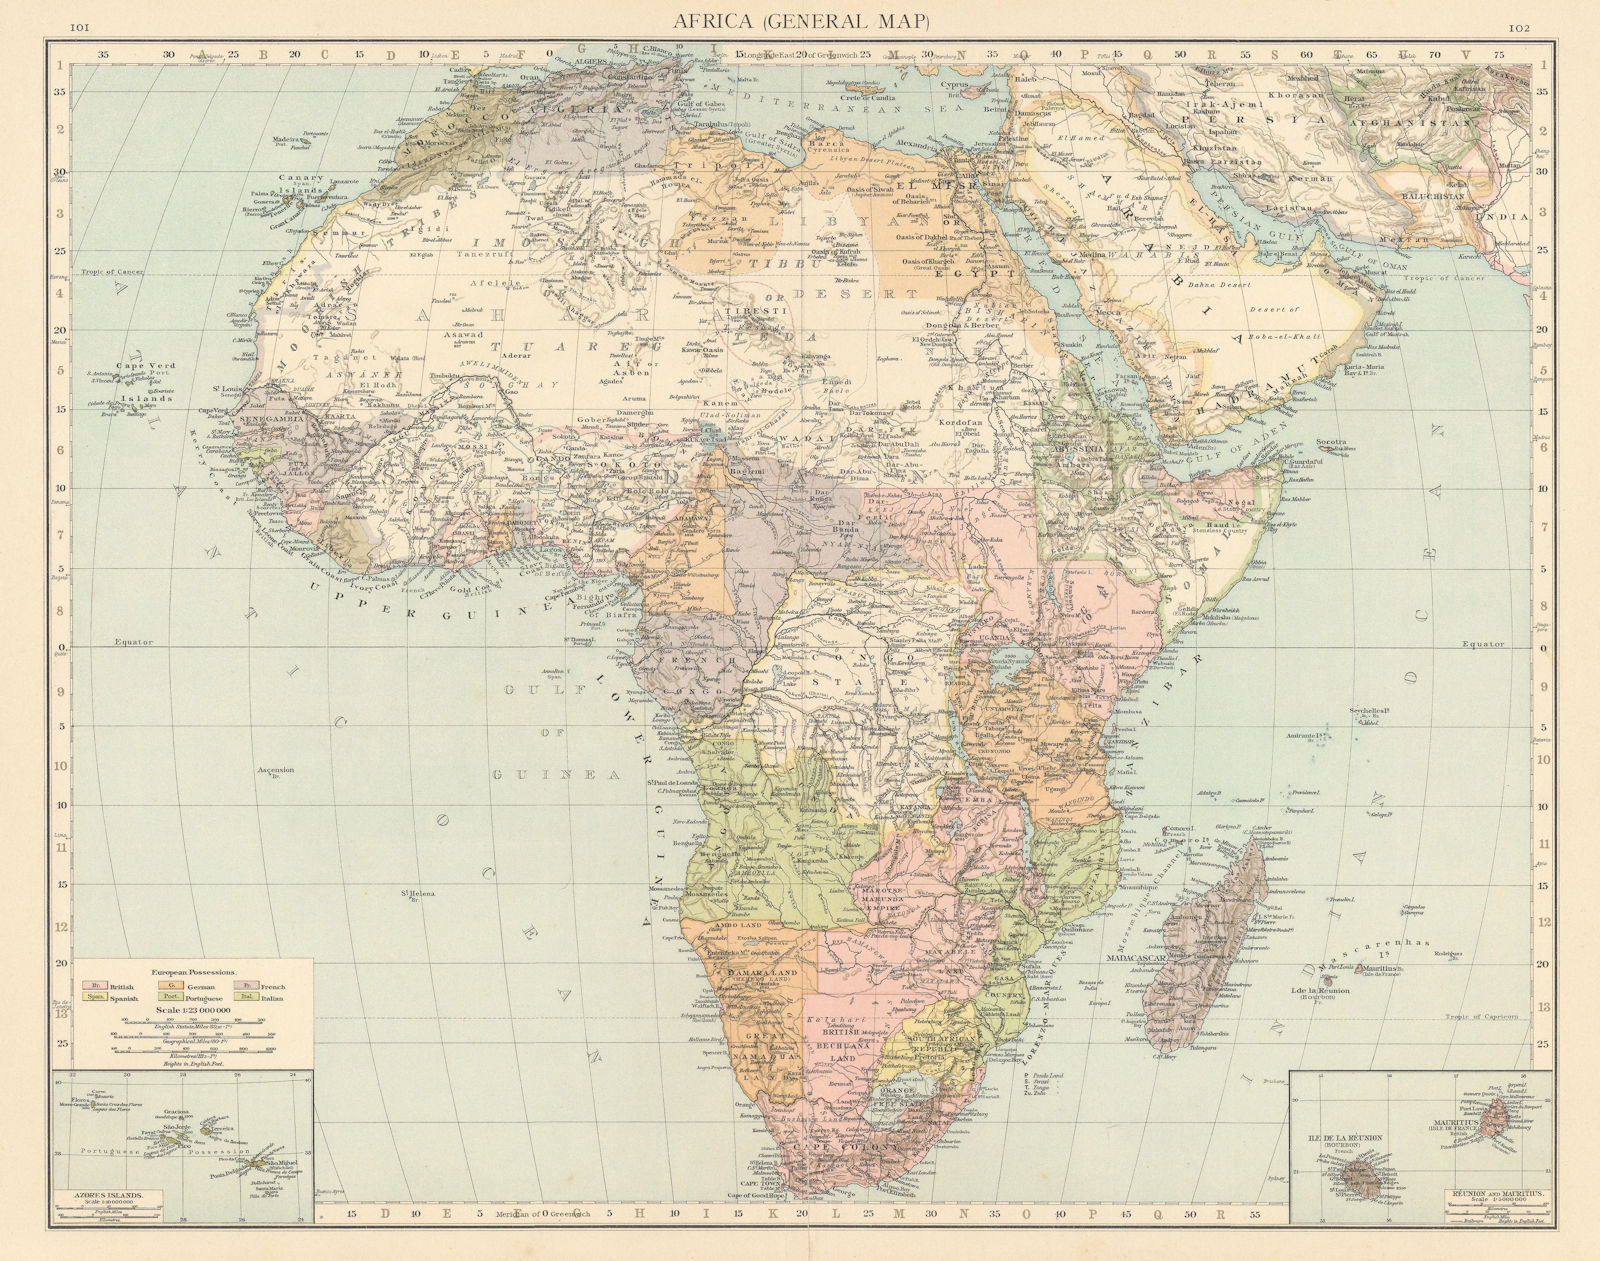 Colonial Africa. British German French Spanish Portuguese Italian TIMES 1895 map